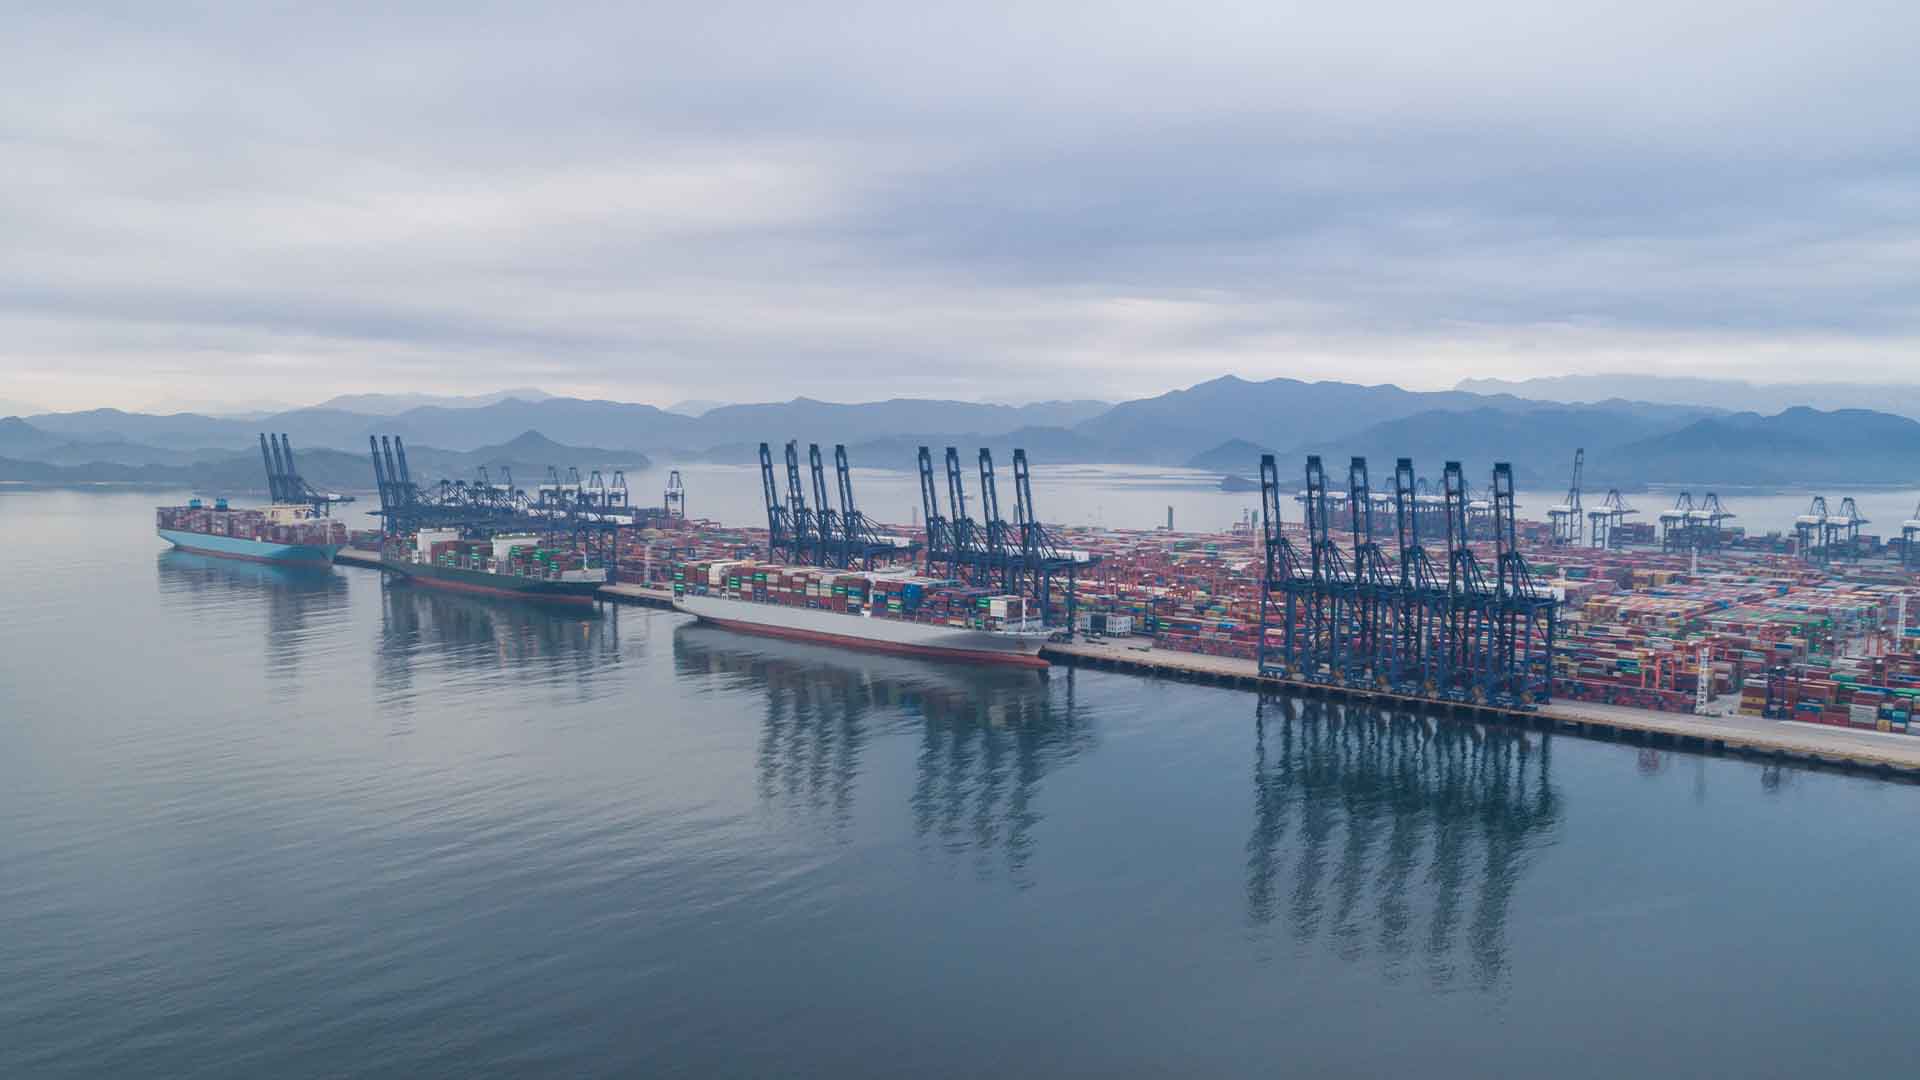 Photo of ships docked in the Hong Kong port